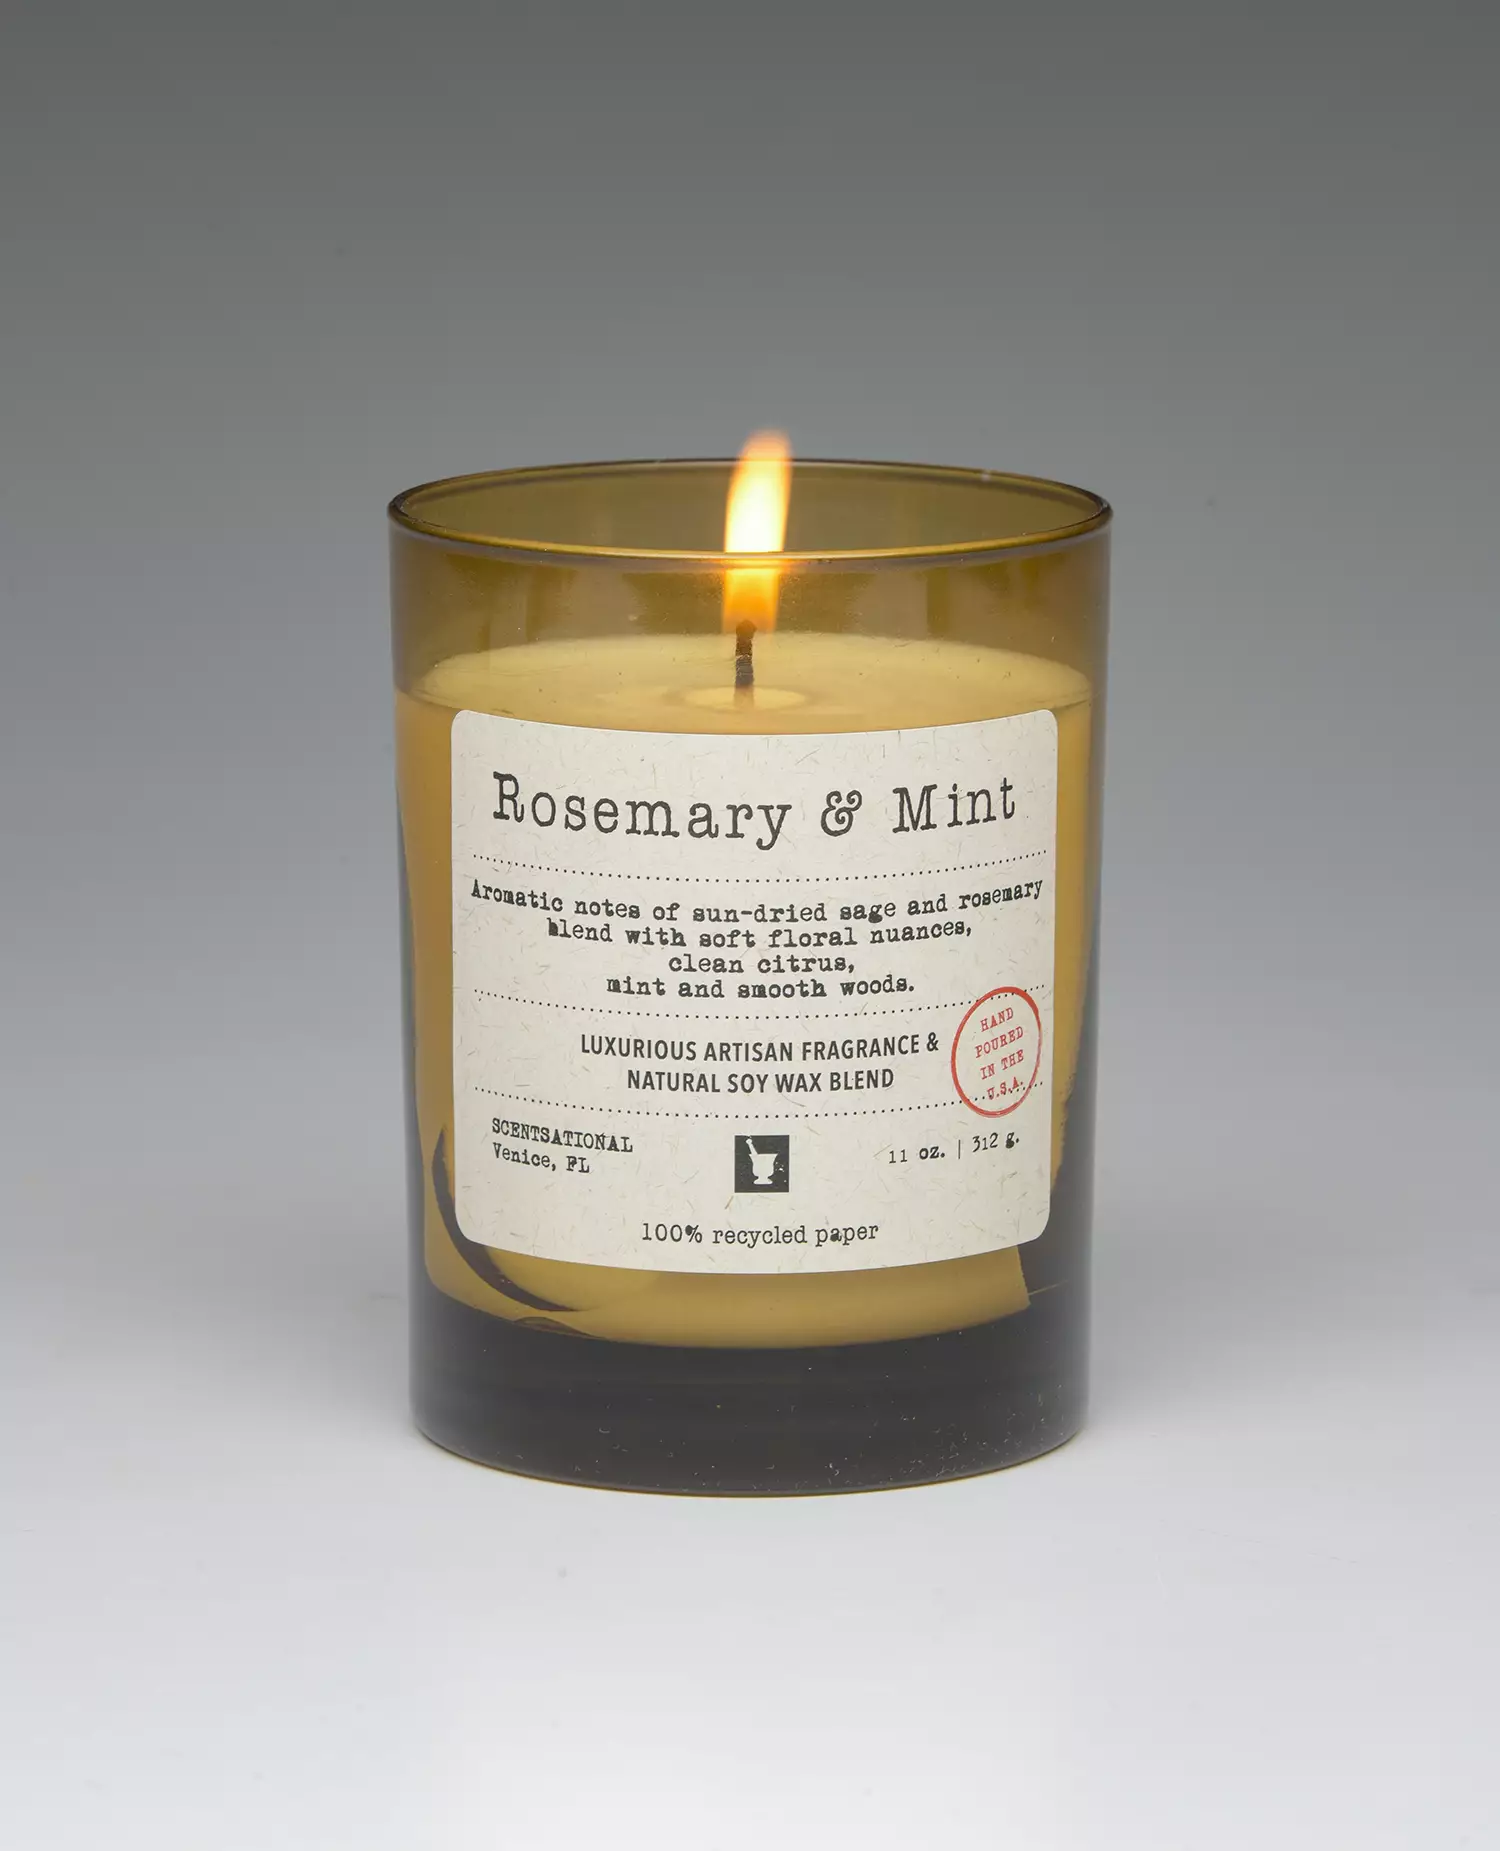 Rosemary & Mint – 11oz scented candle burning